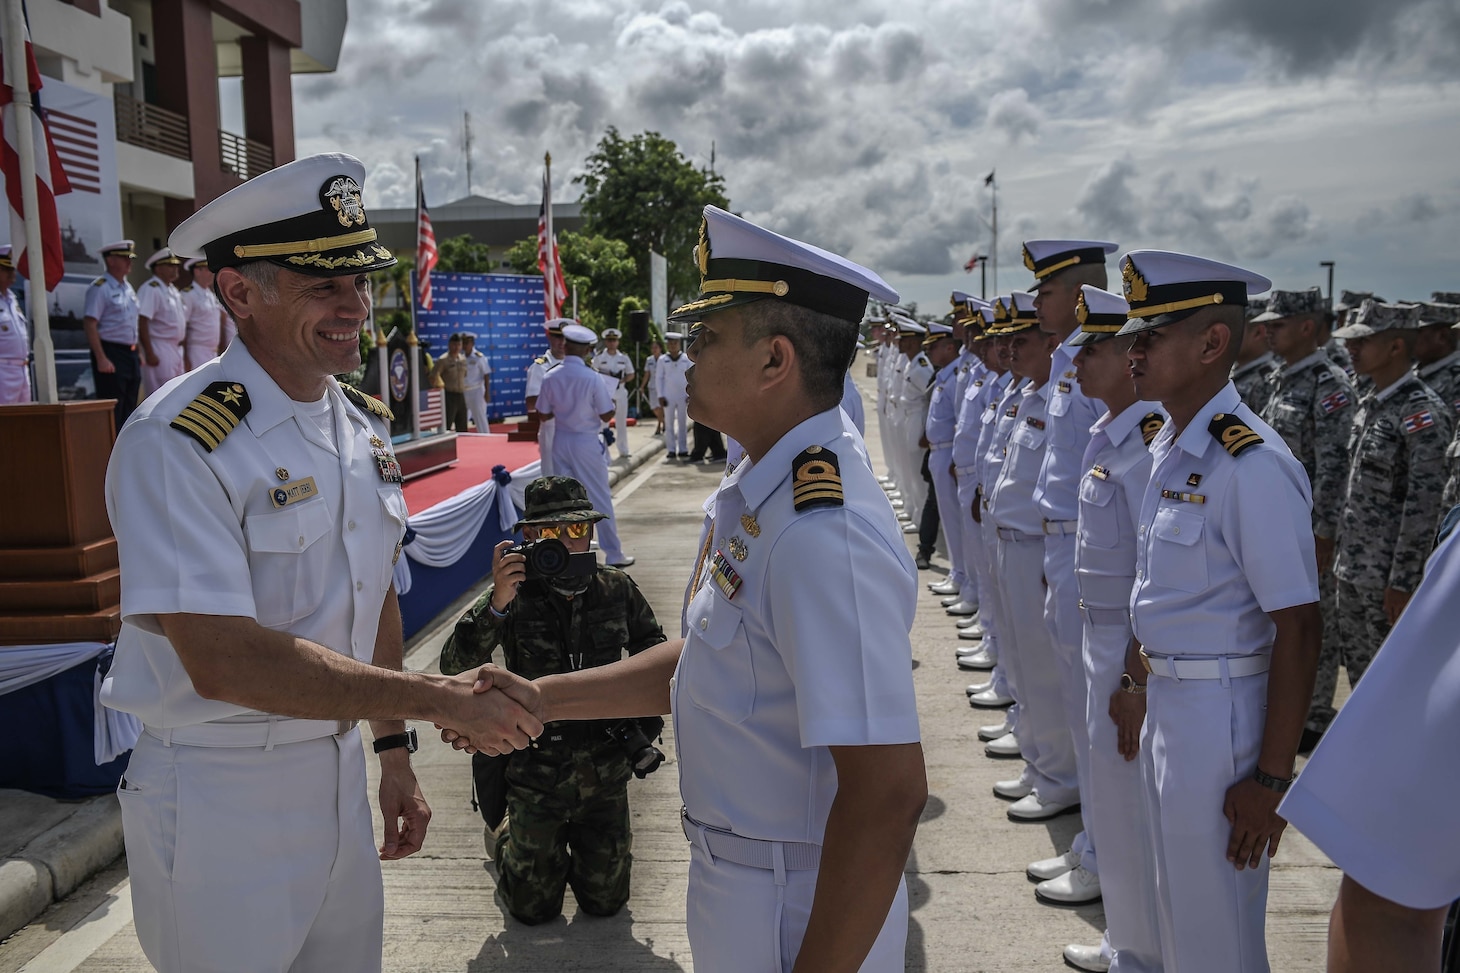 This year marks the 25th iteration of CARAT, a multinational exercise series designed to enhance U.S. and partner navies' abilities to operate together in response to traditional and non-traditional maritime security challenges in the Indo-Pacific region.